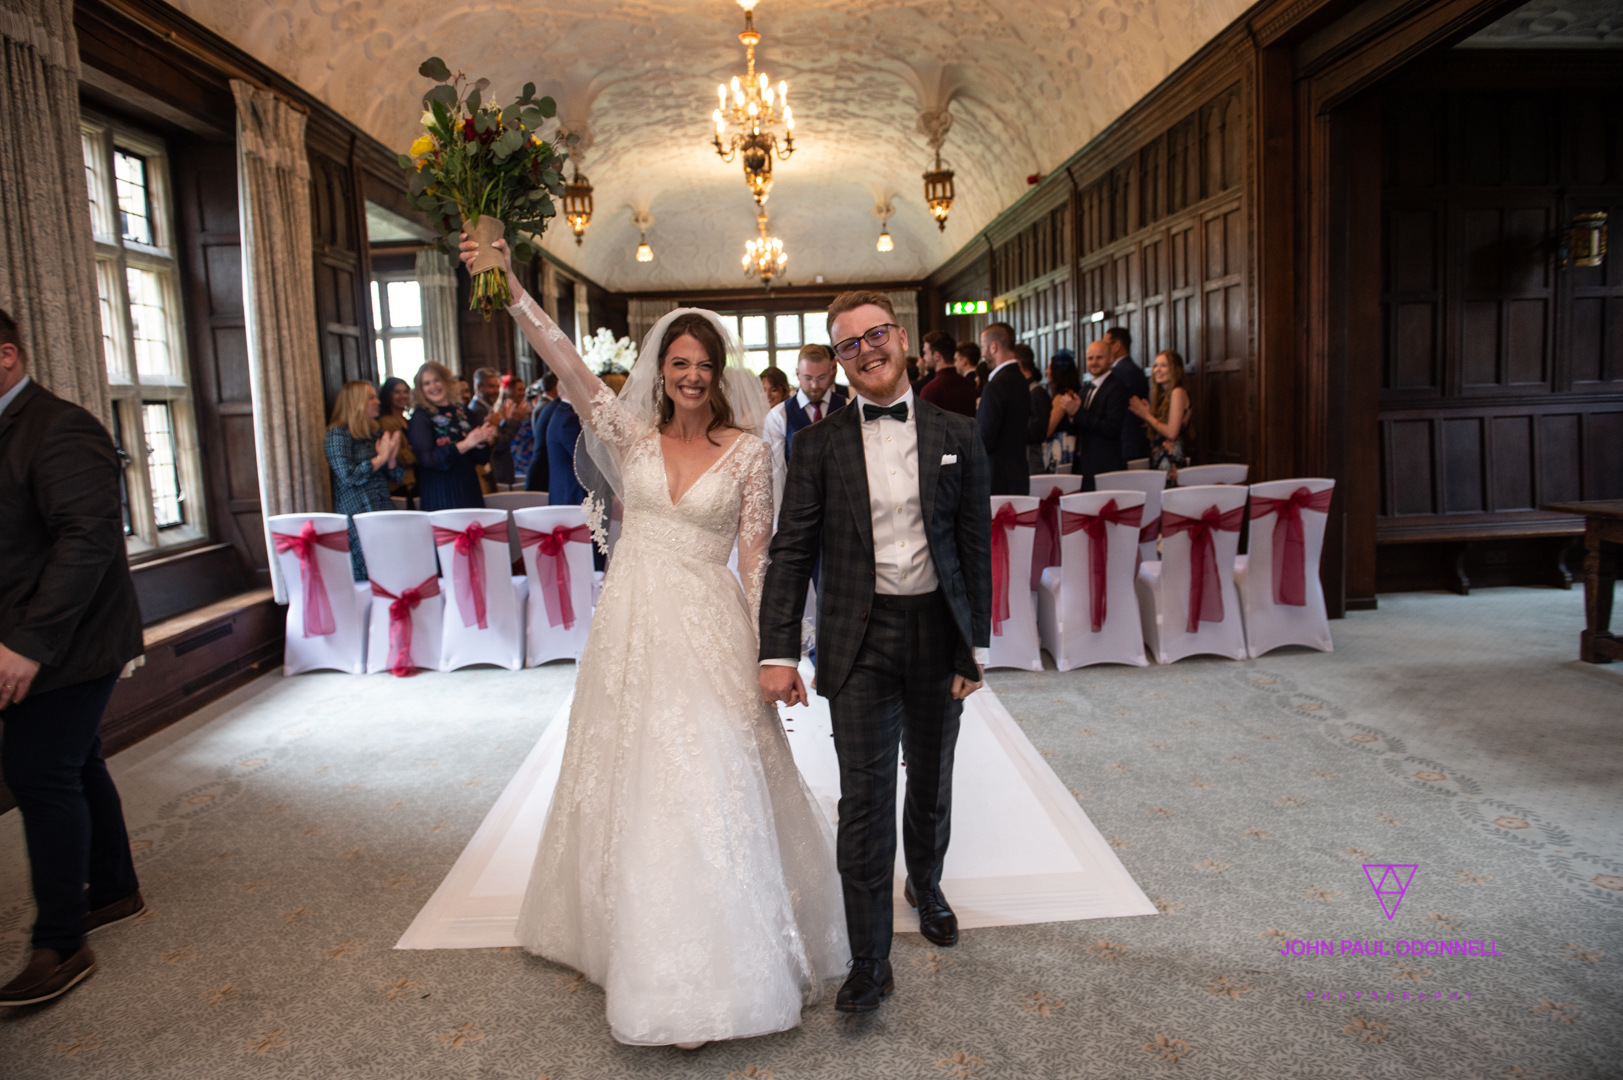 Emily and Connors Wedding at Fanhams Hall